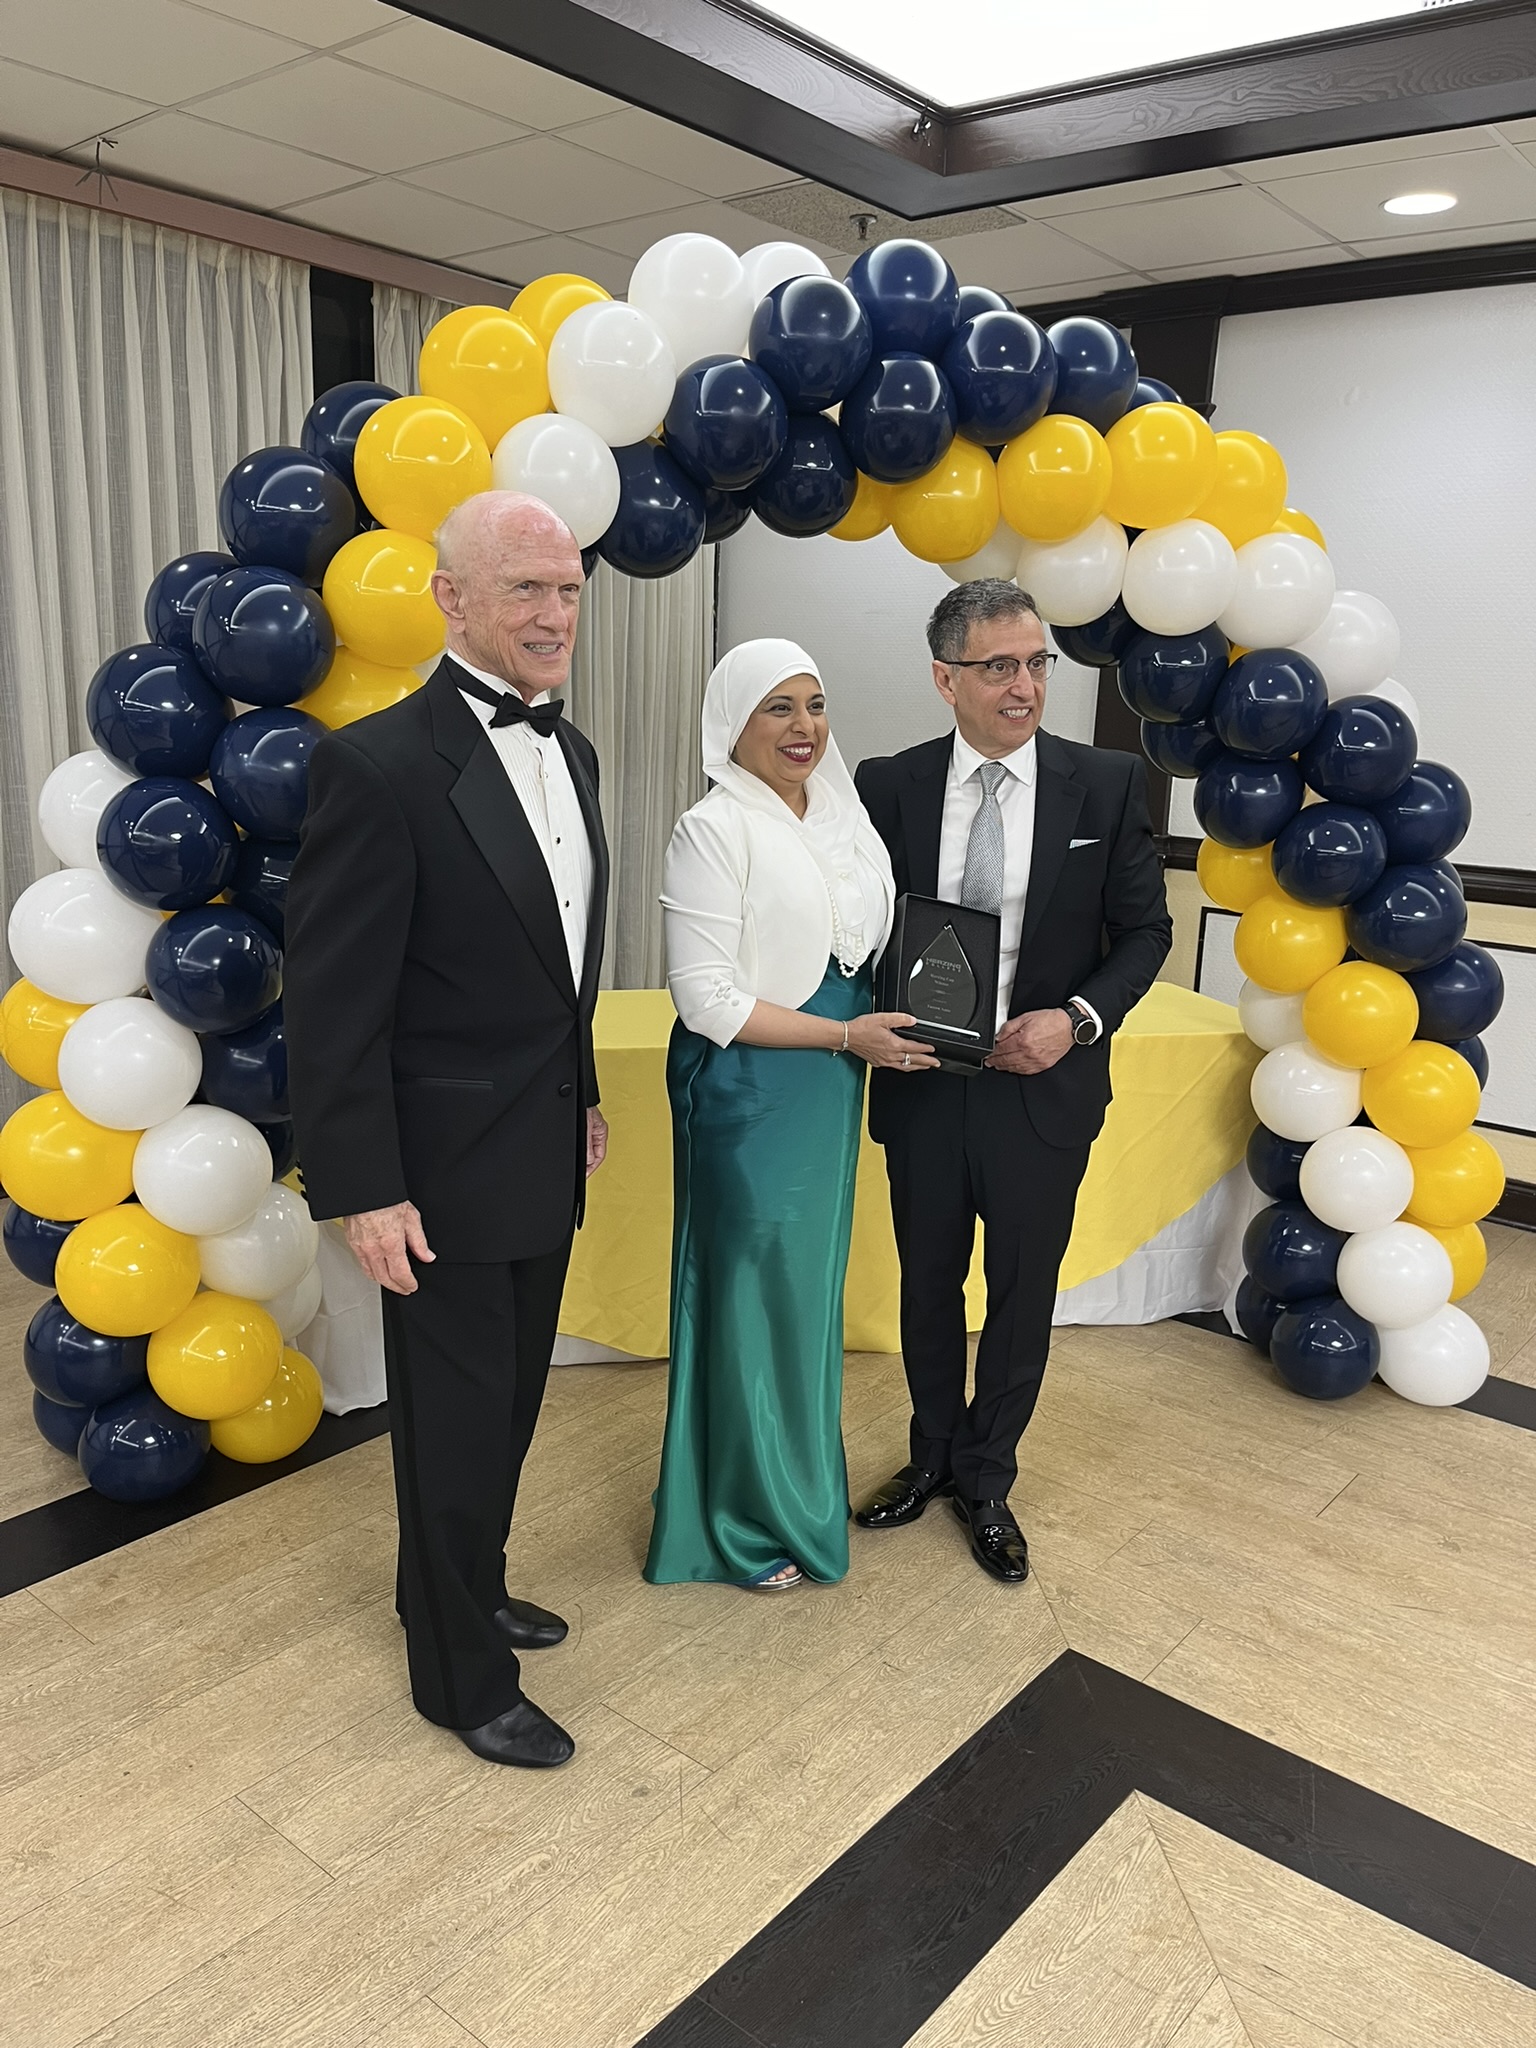 Woman posing with two men while receiving award